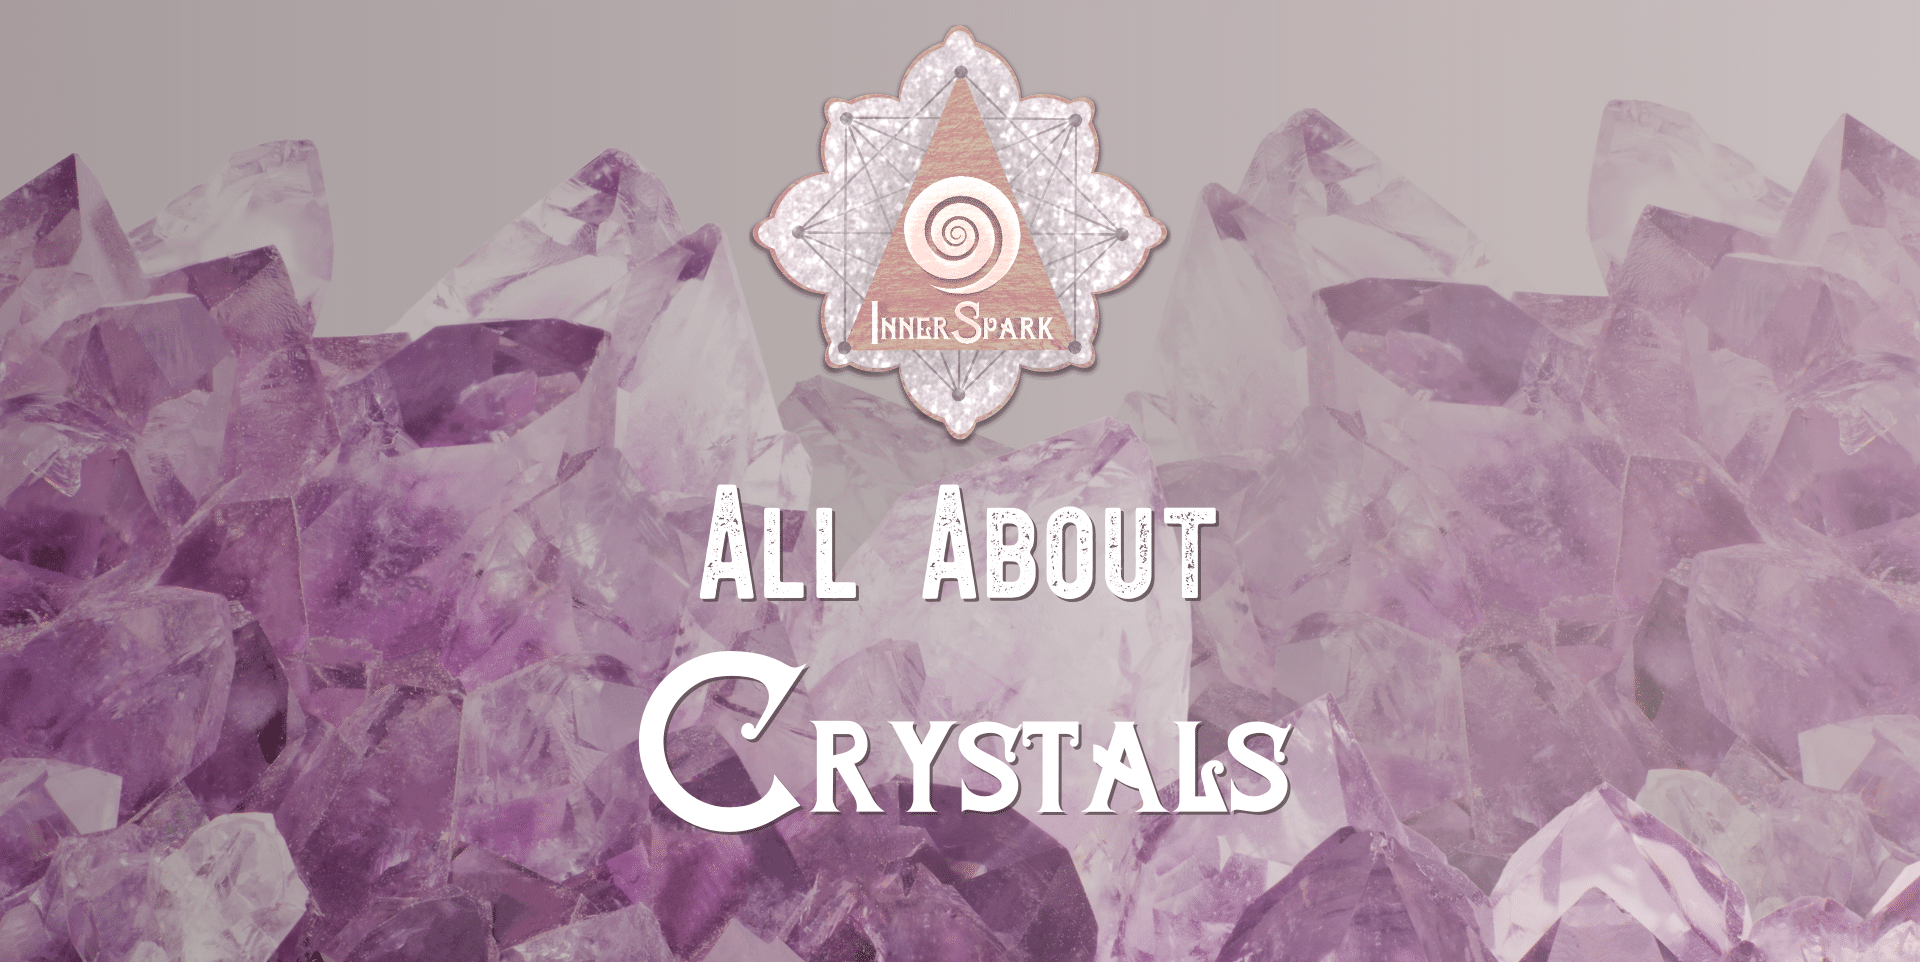 All About Crystals